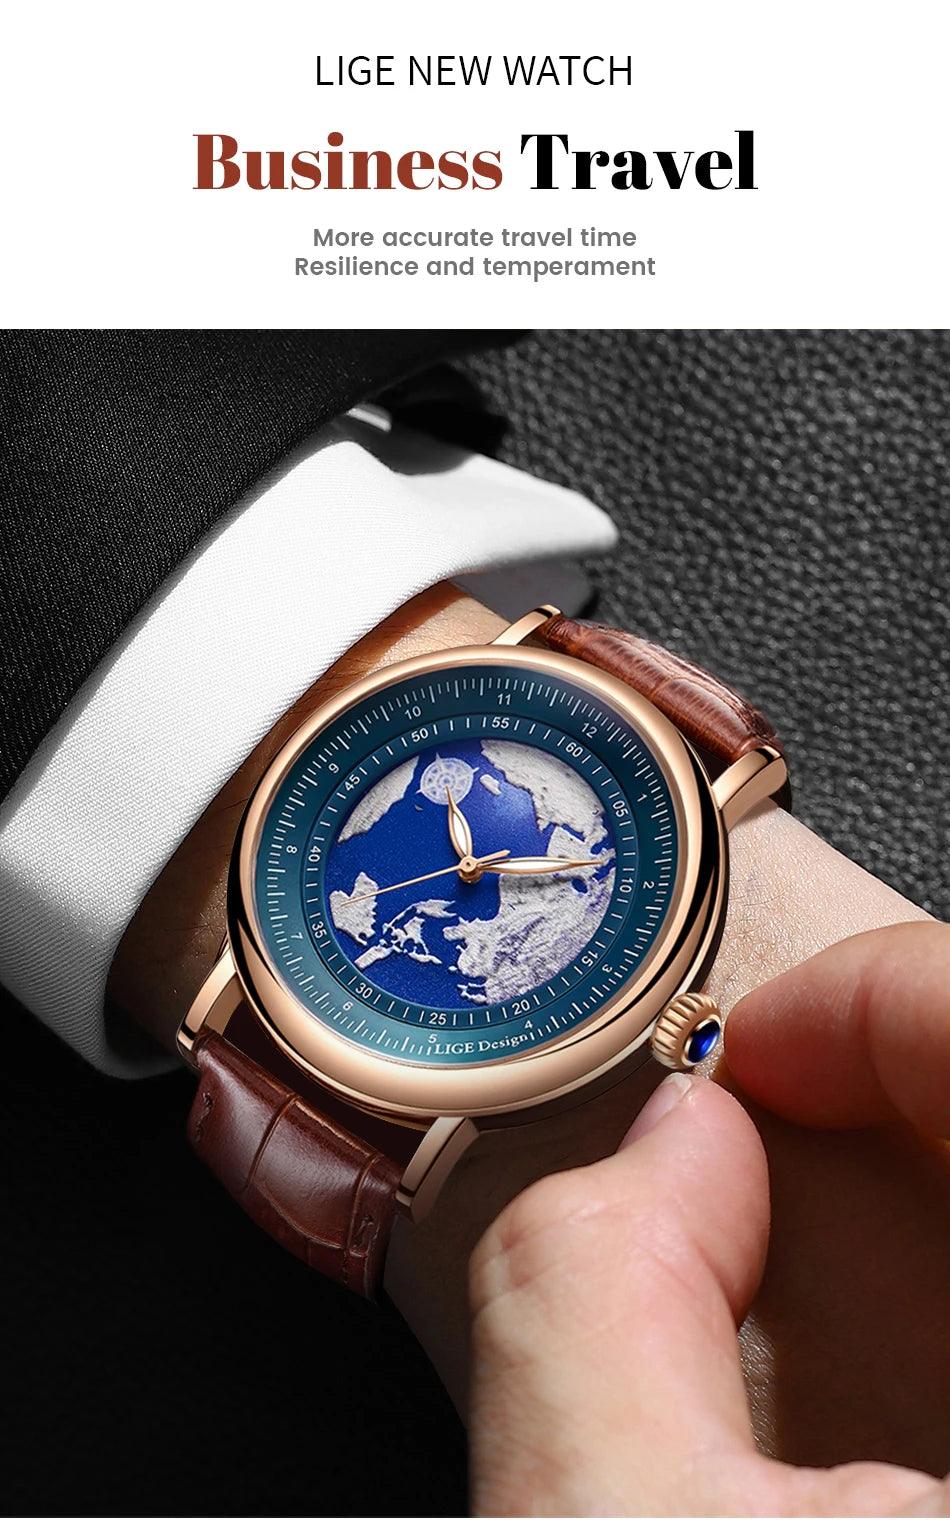 New Arrival Blue Planet Creative Earth Fashion Quartz Wristwatches -  Leather Sport Luminous Dial Mens Watches - The Jewellery Supermarket